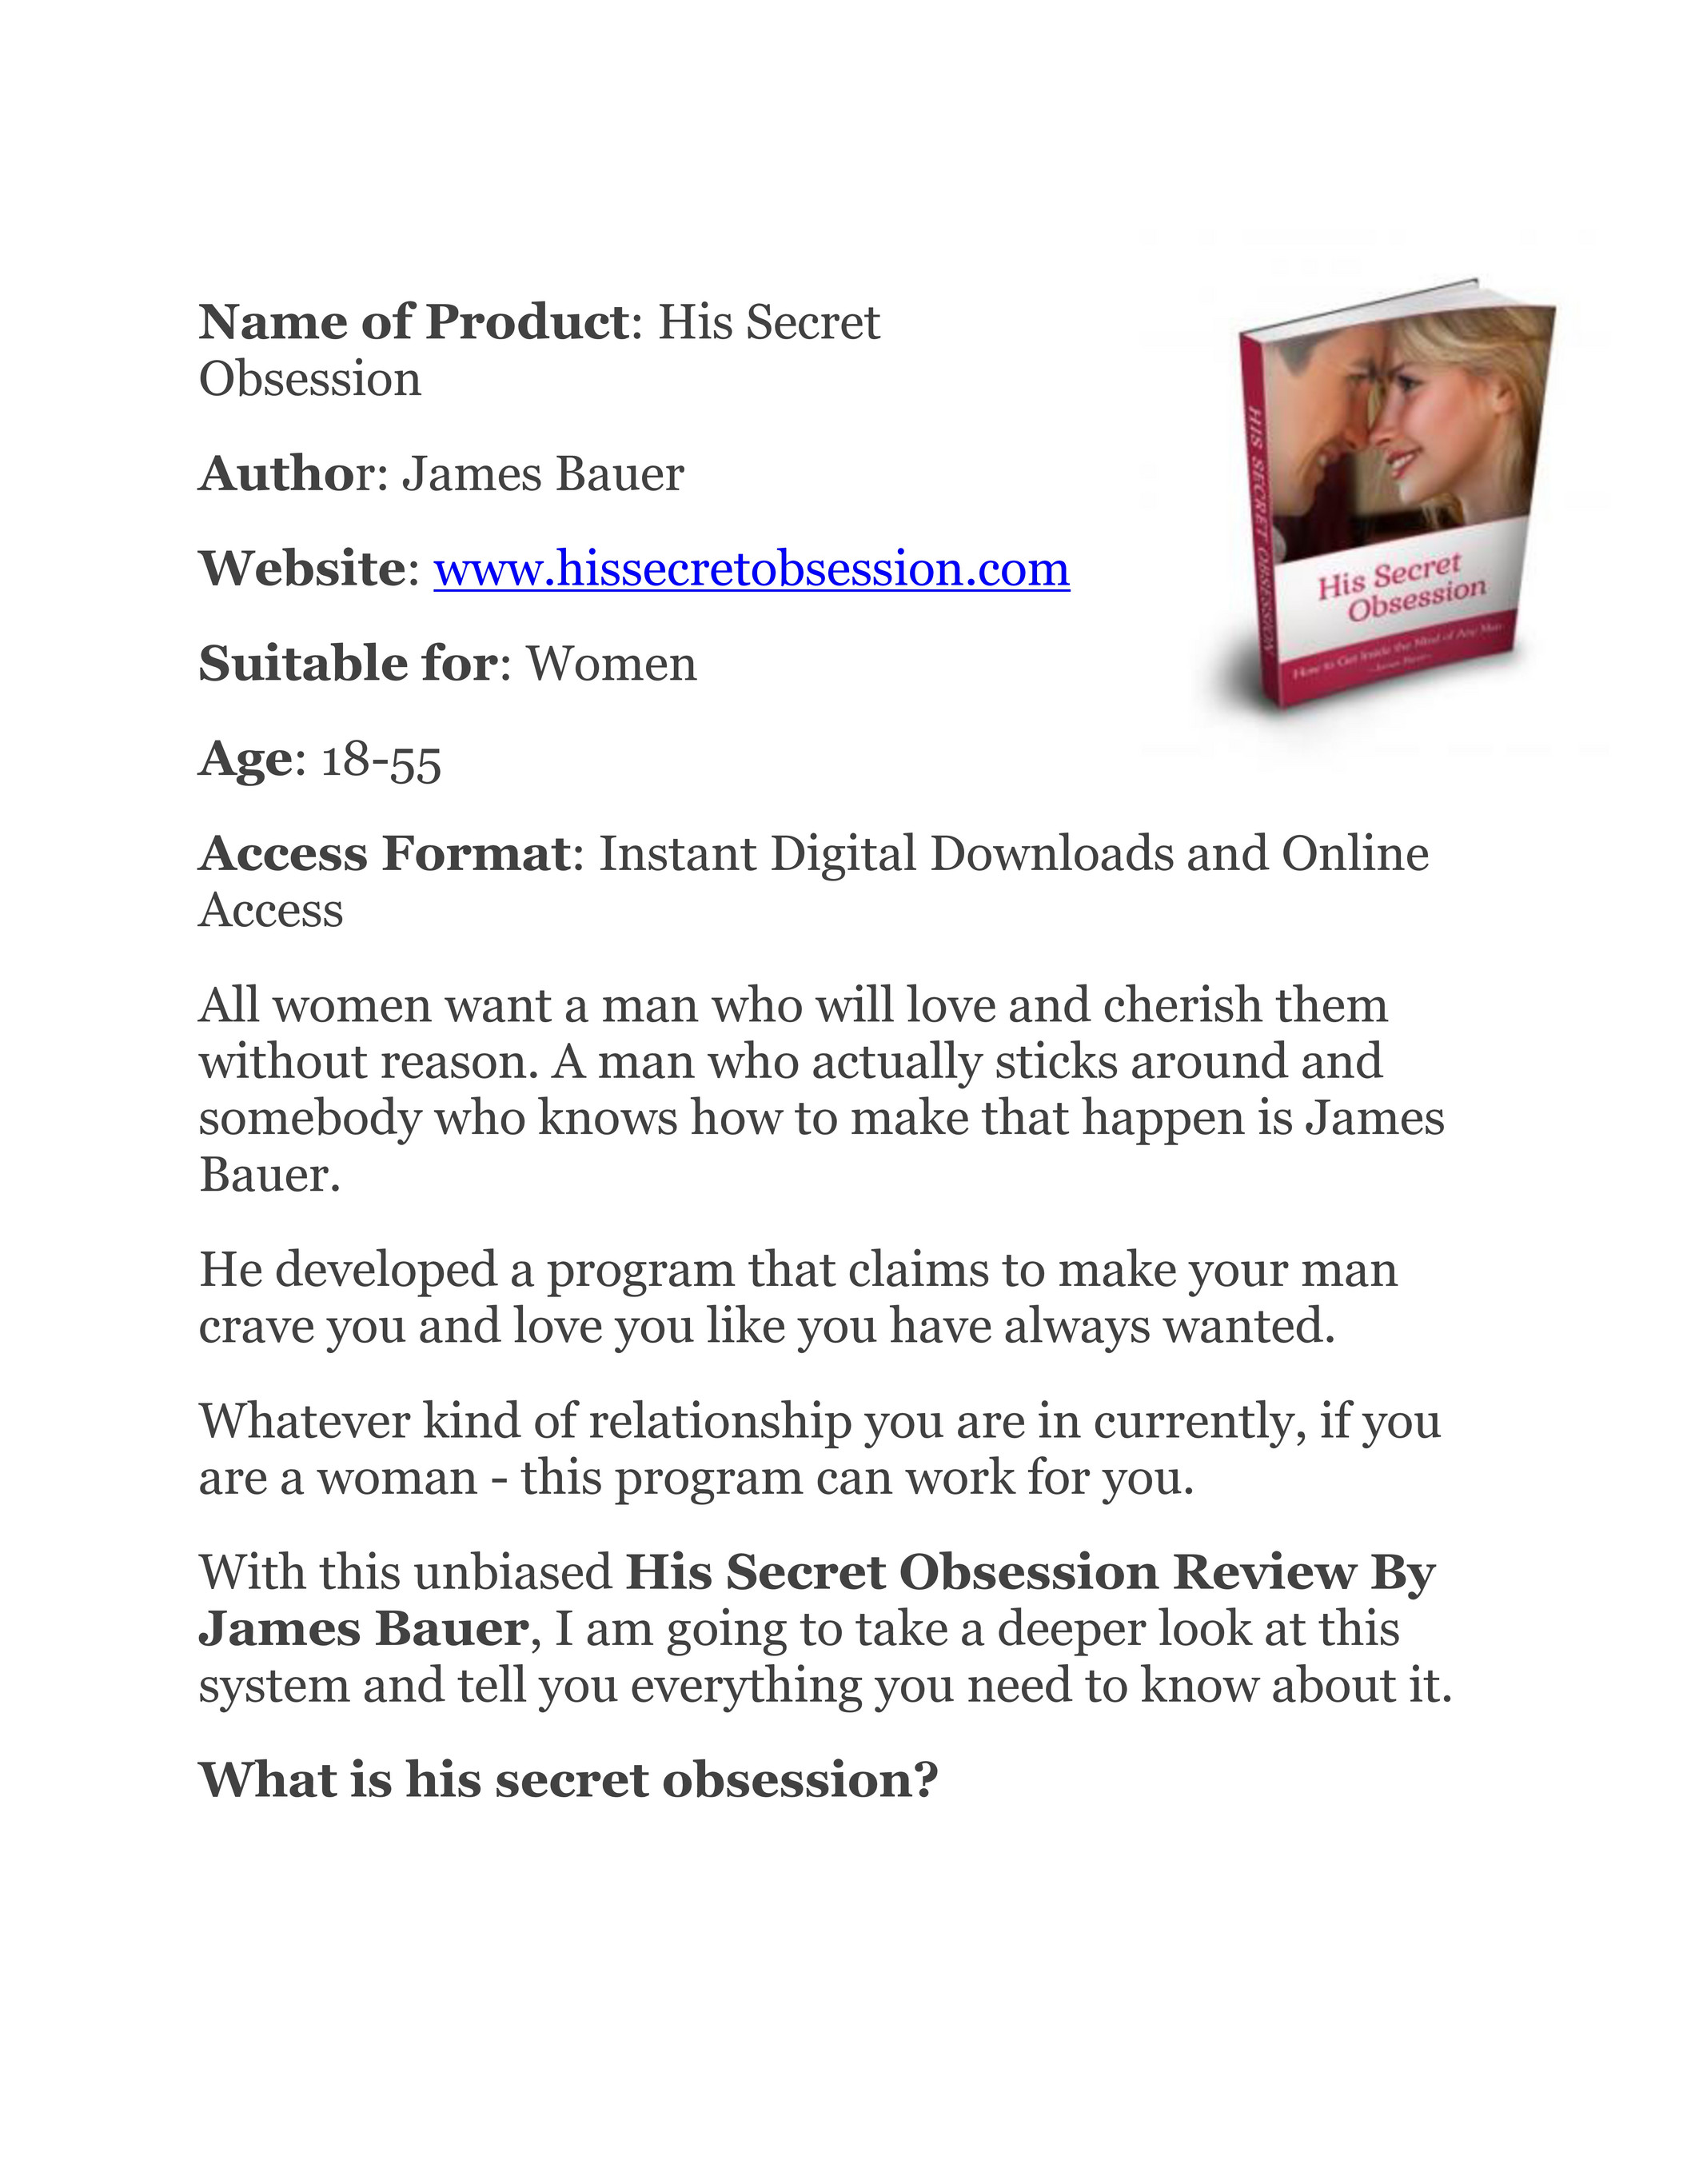 The Complete Guide To Understanding His Secret Obsession Review